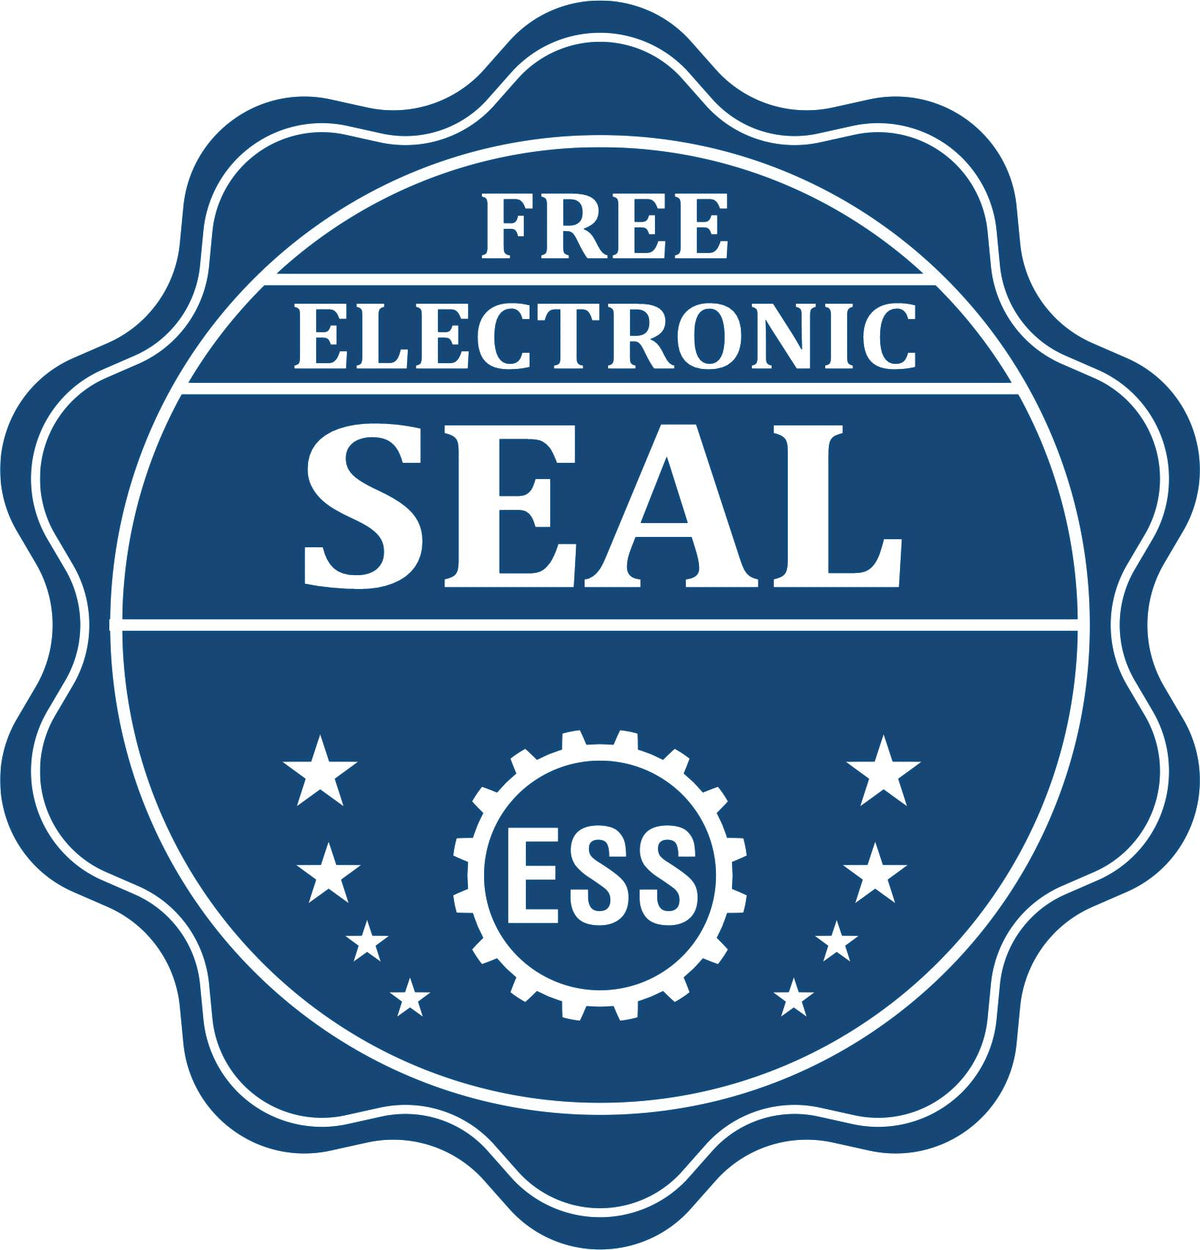 A badge showing a free electronic seal for the Handheld New York Architect Seal Embosser with stars and the ESS gear on the emblem.